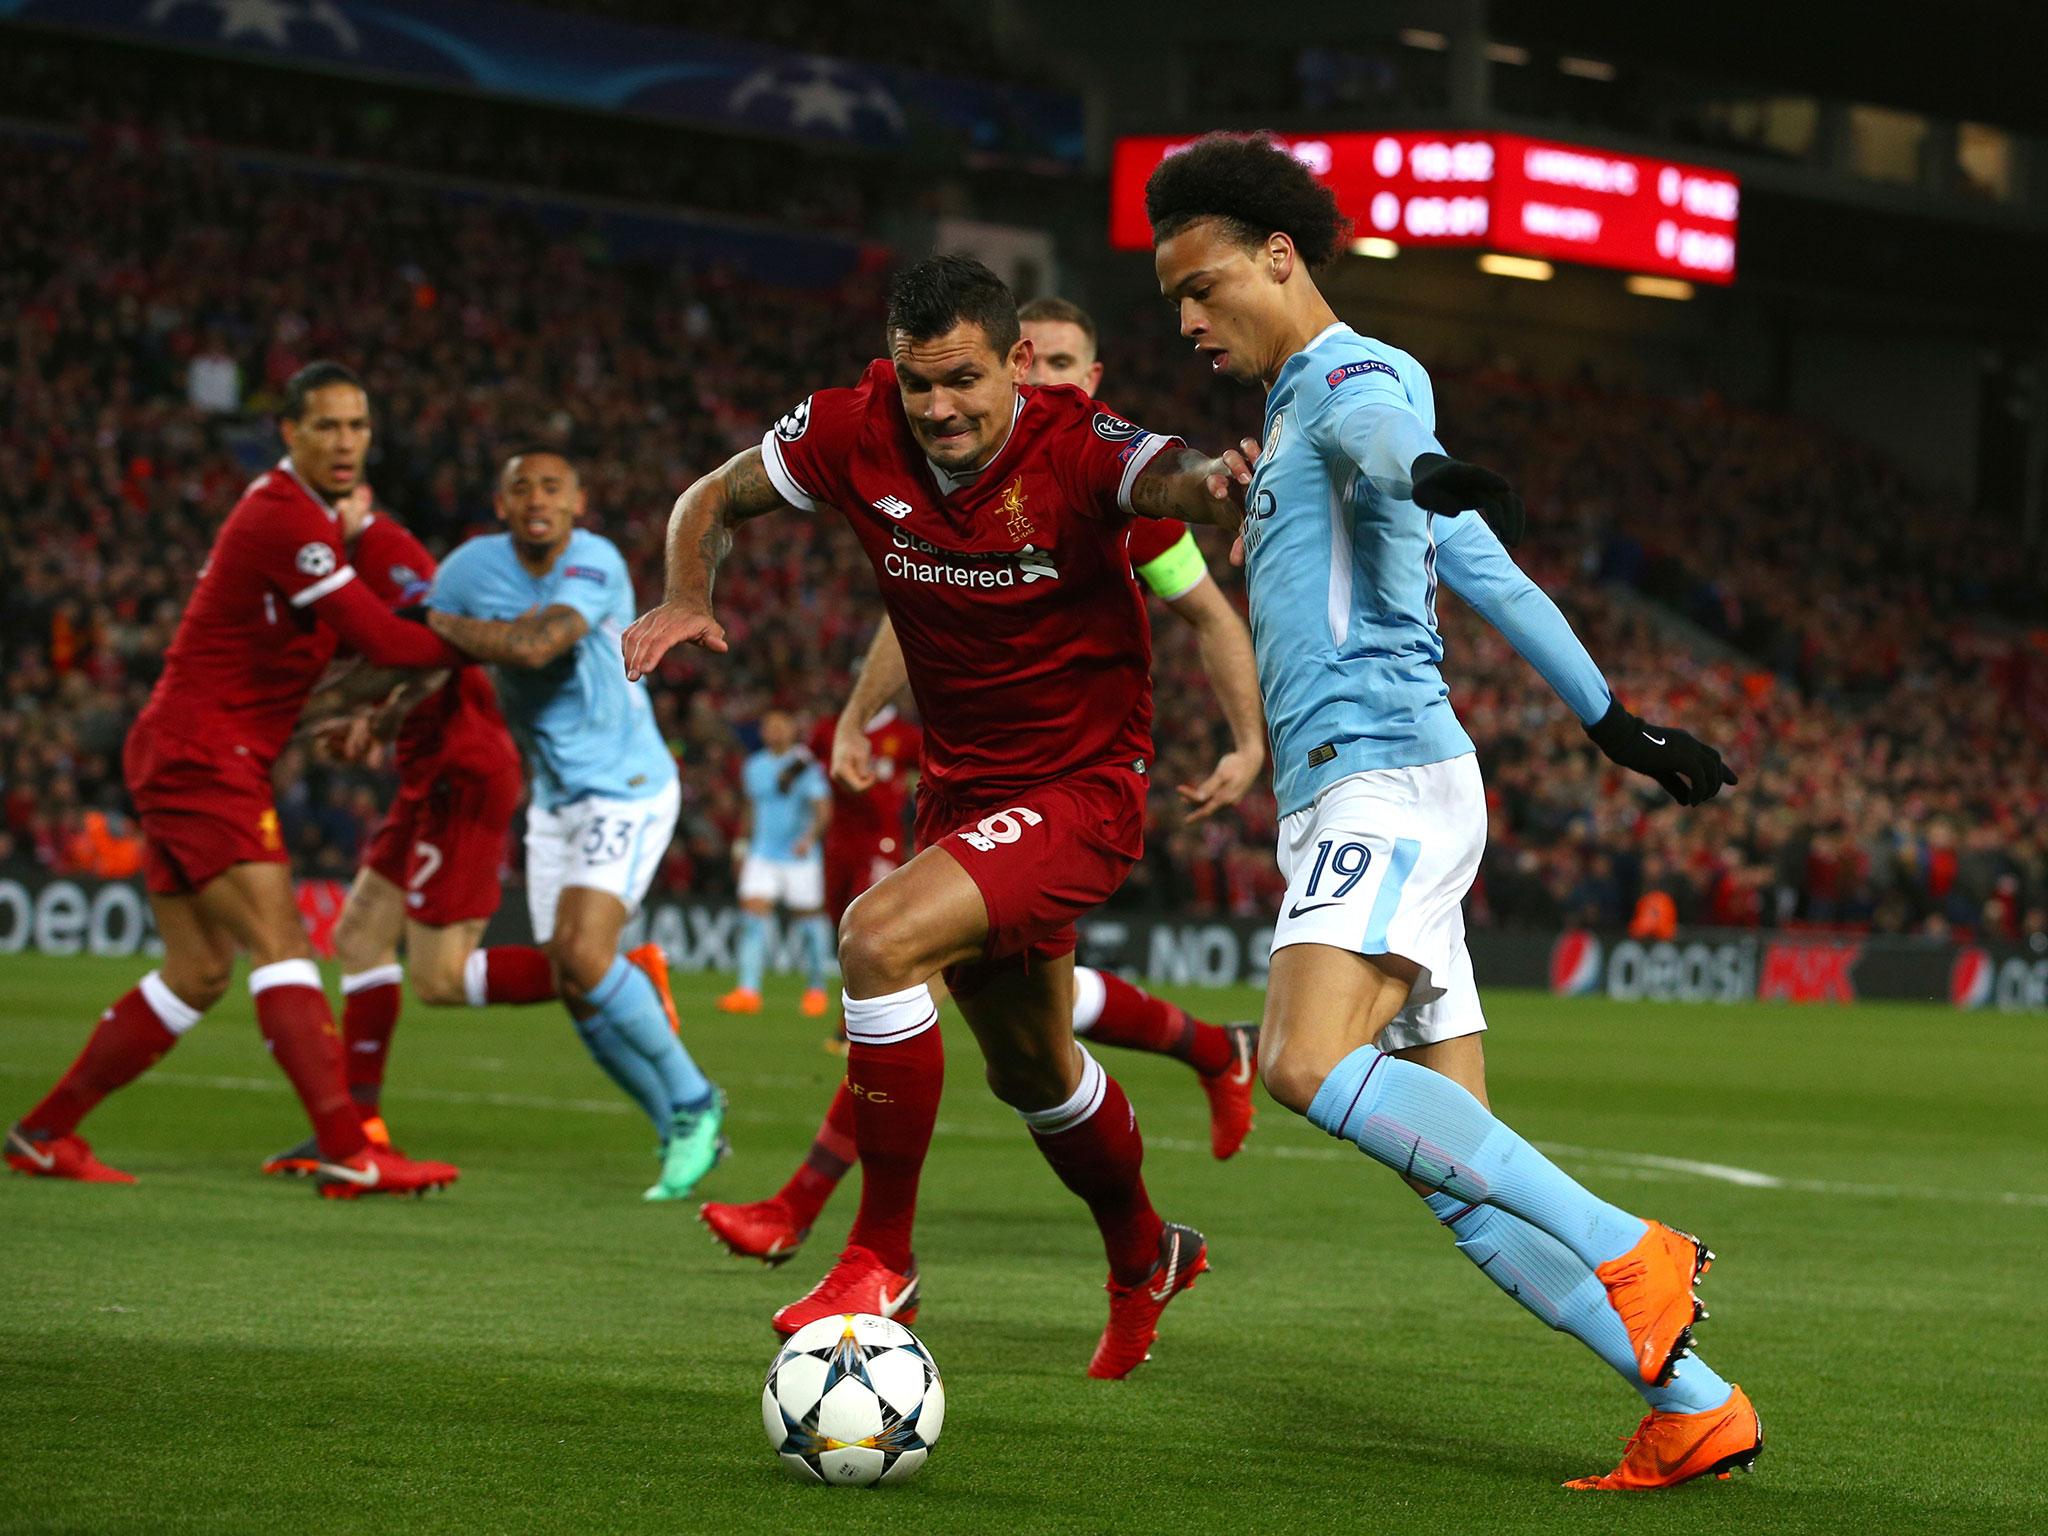 Liverpool and Manchester City go head to head for a spot in the semi-finals